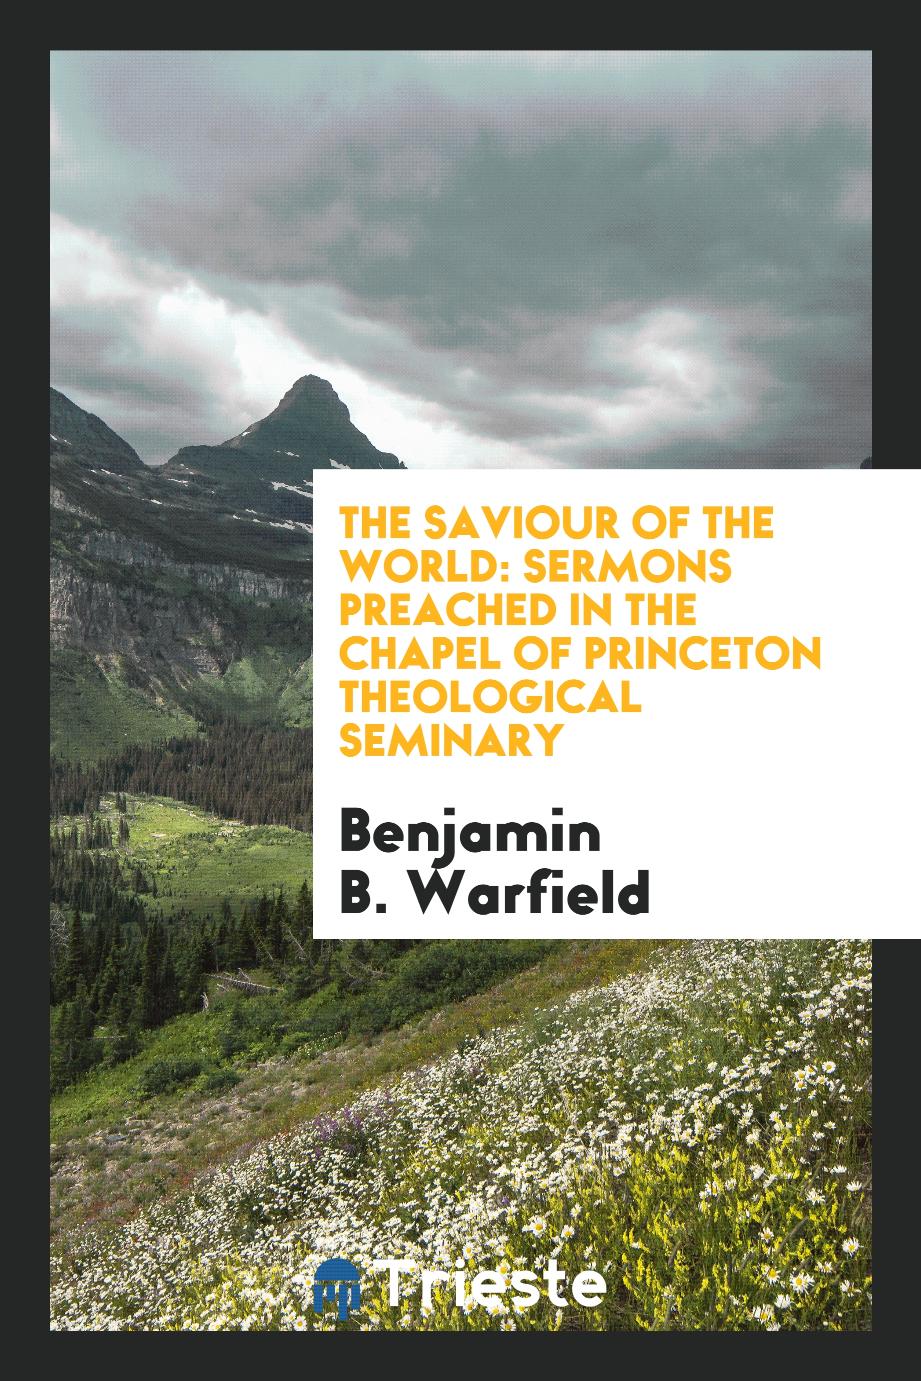 The saviour of the world: Sermons preached in the chapel of Princeton Theological Seminary